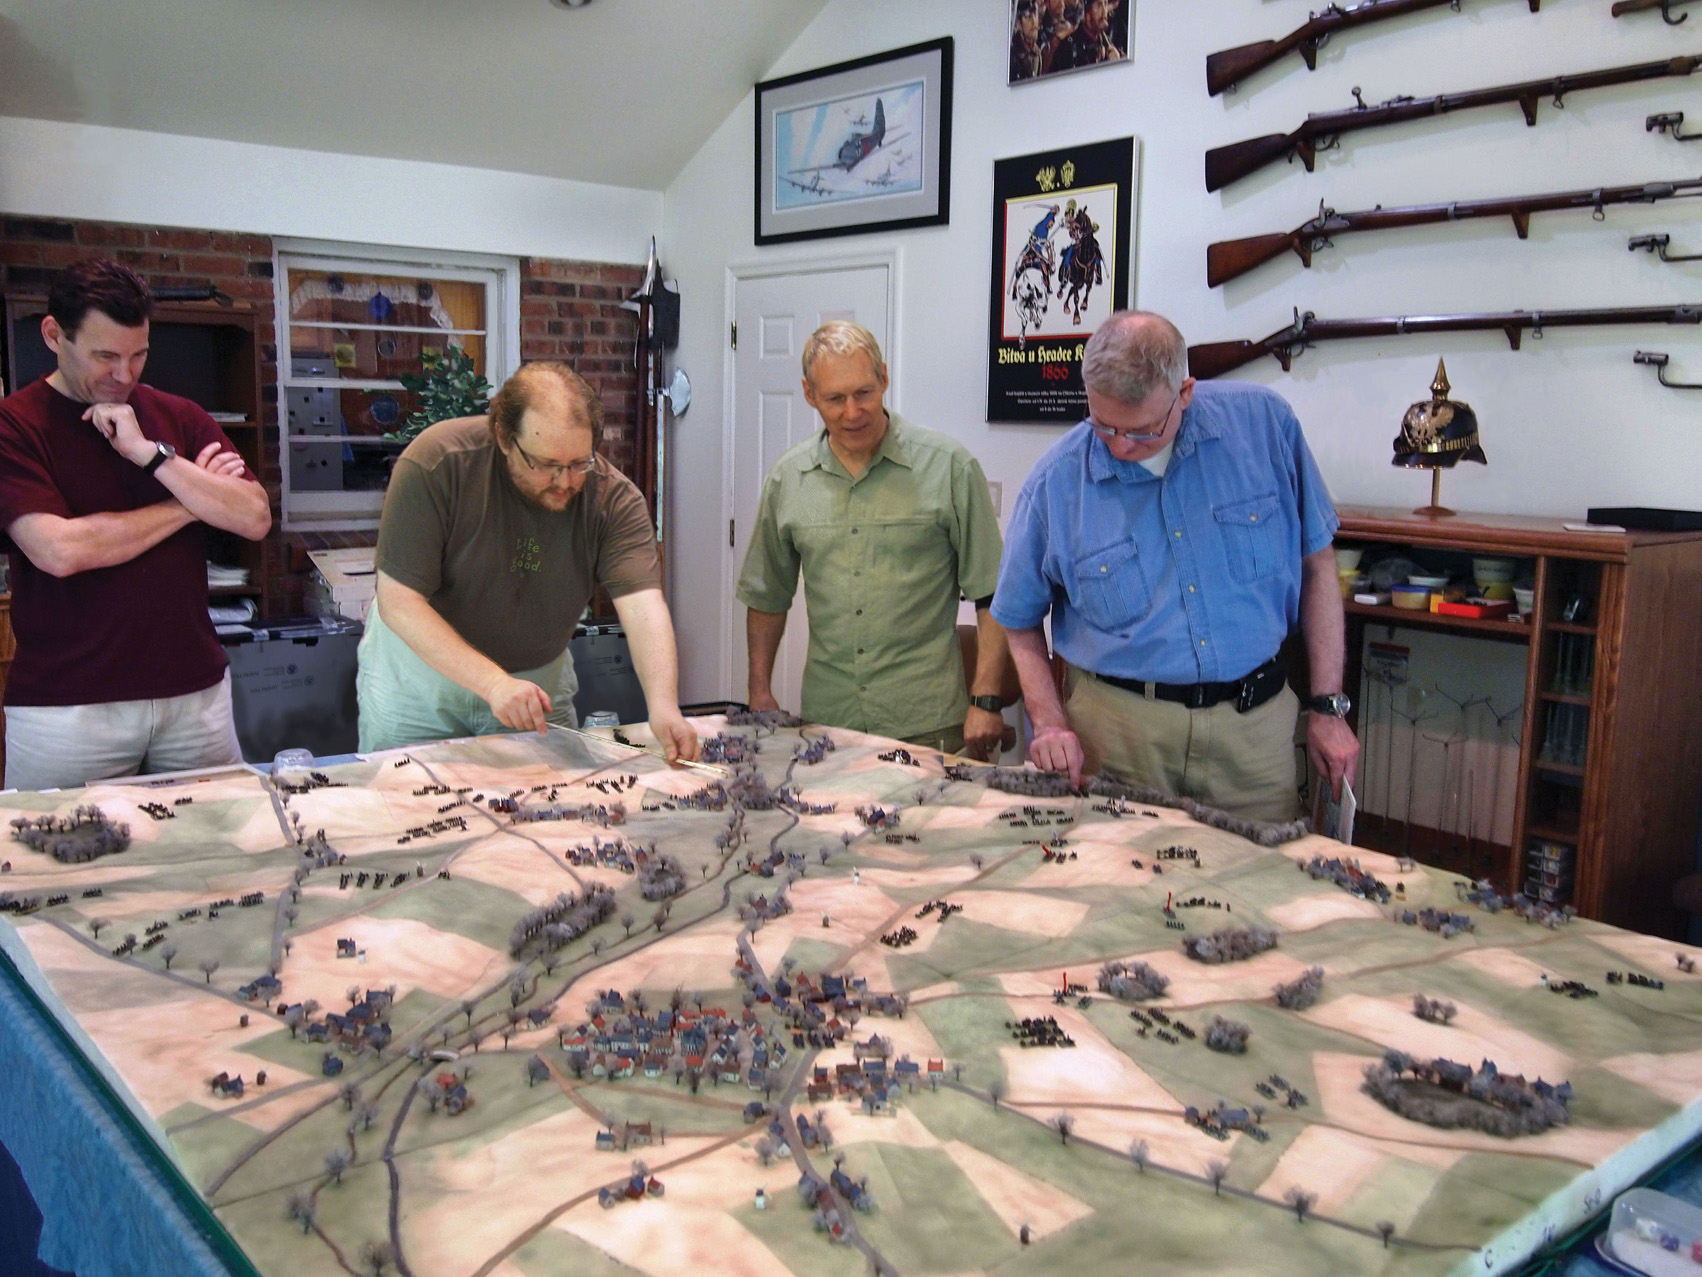 Participants refight the Battle of St. Quentin using the author’s 1:4000 scale terrain board representing about 65 square kilometers of the battlefield. Each infantry stand represents an infantry battalion, a battery, or two squadrons of cavalry.